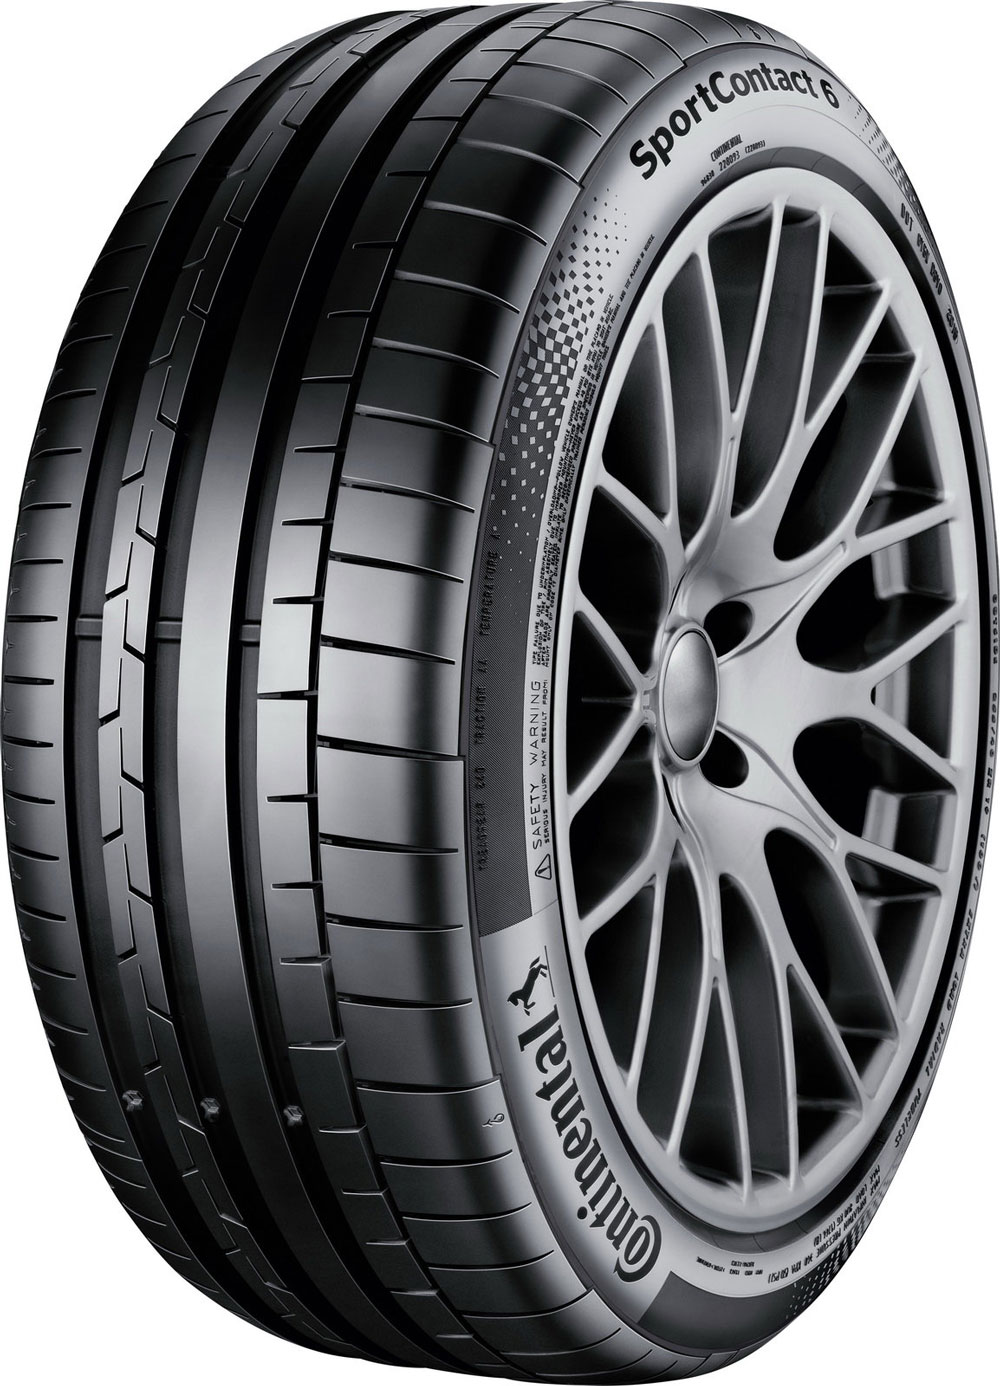 Гуми за кола CONTINENTAL SPORT CONTACT 6 XL 255/30 R20 92Y